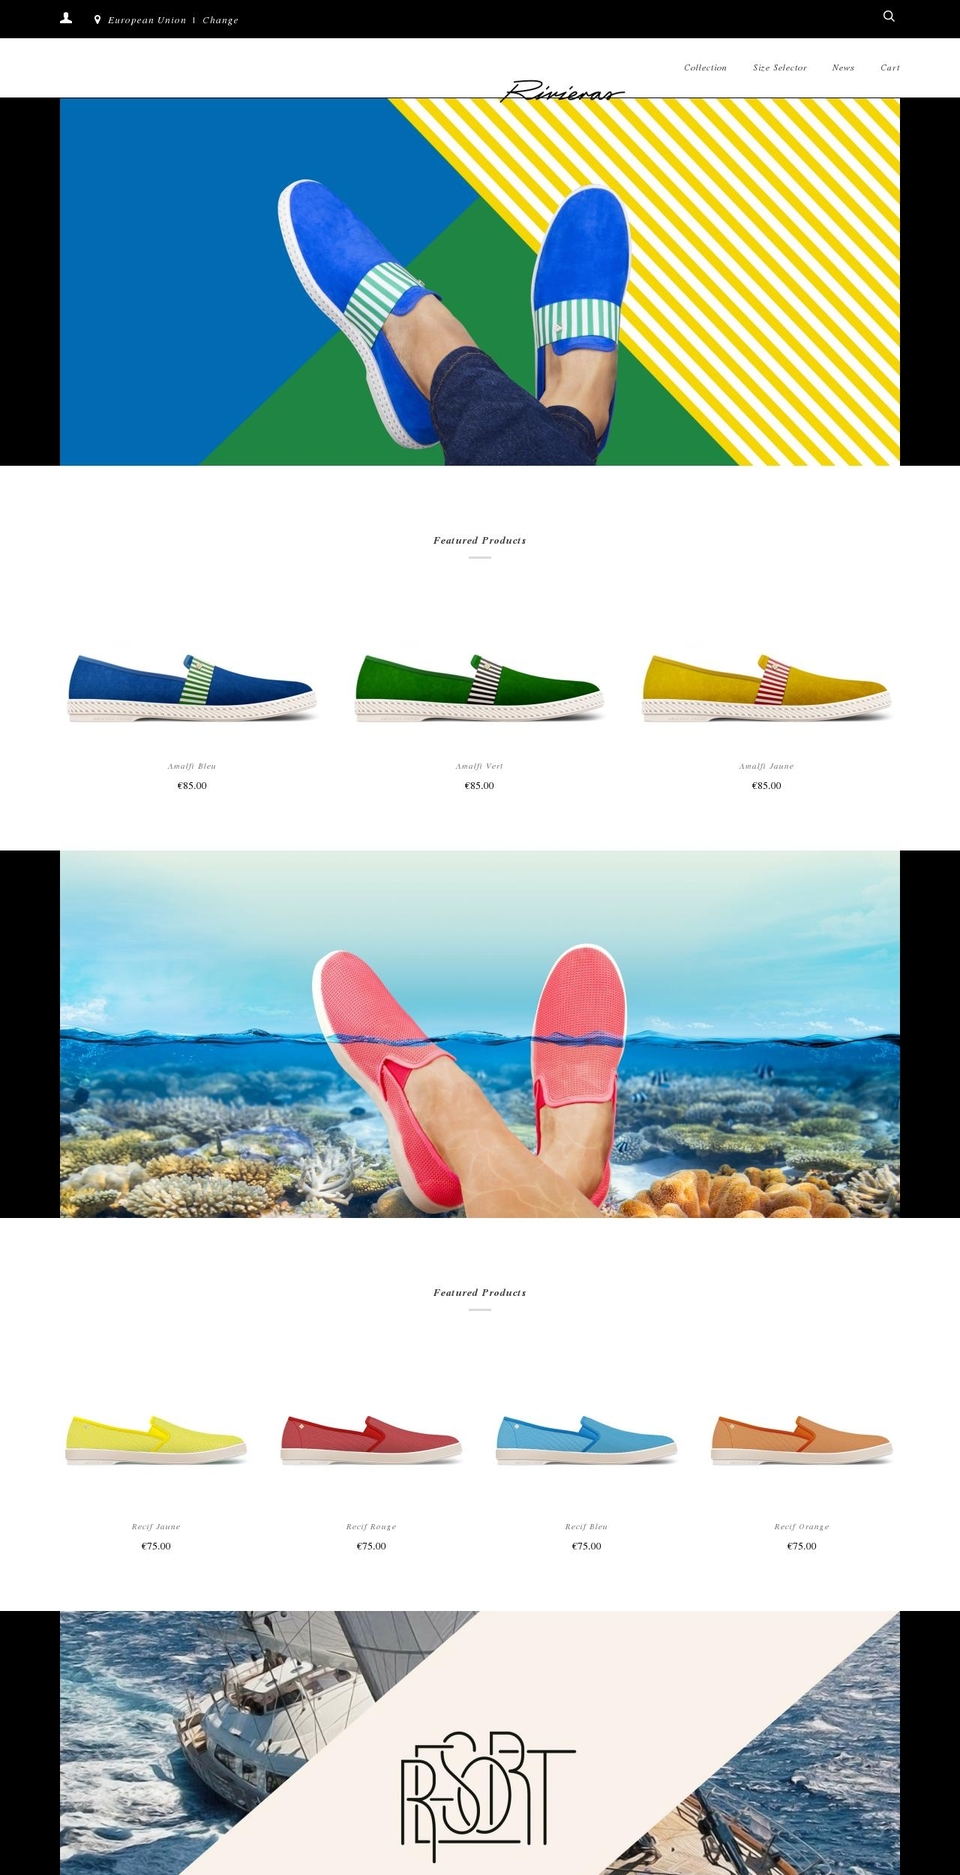 Rivieras [Plus]-TH-July-30-2018 Shopify theme site example rivieras.fr